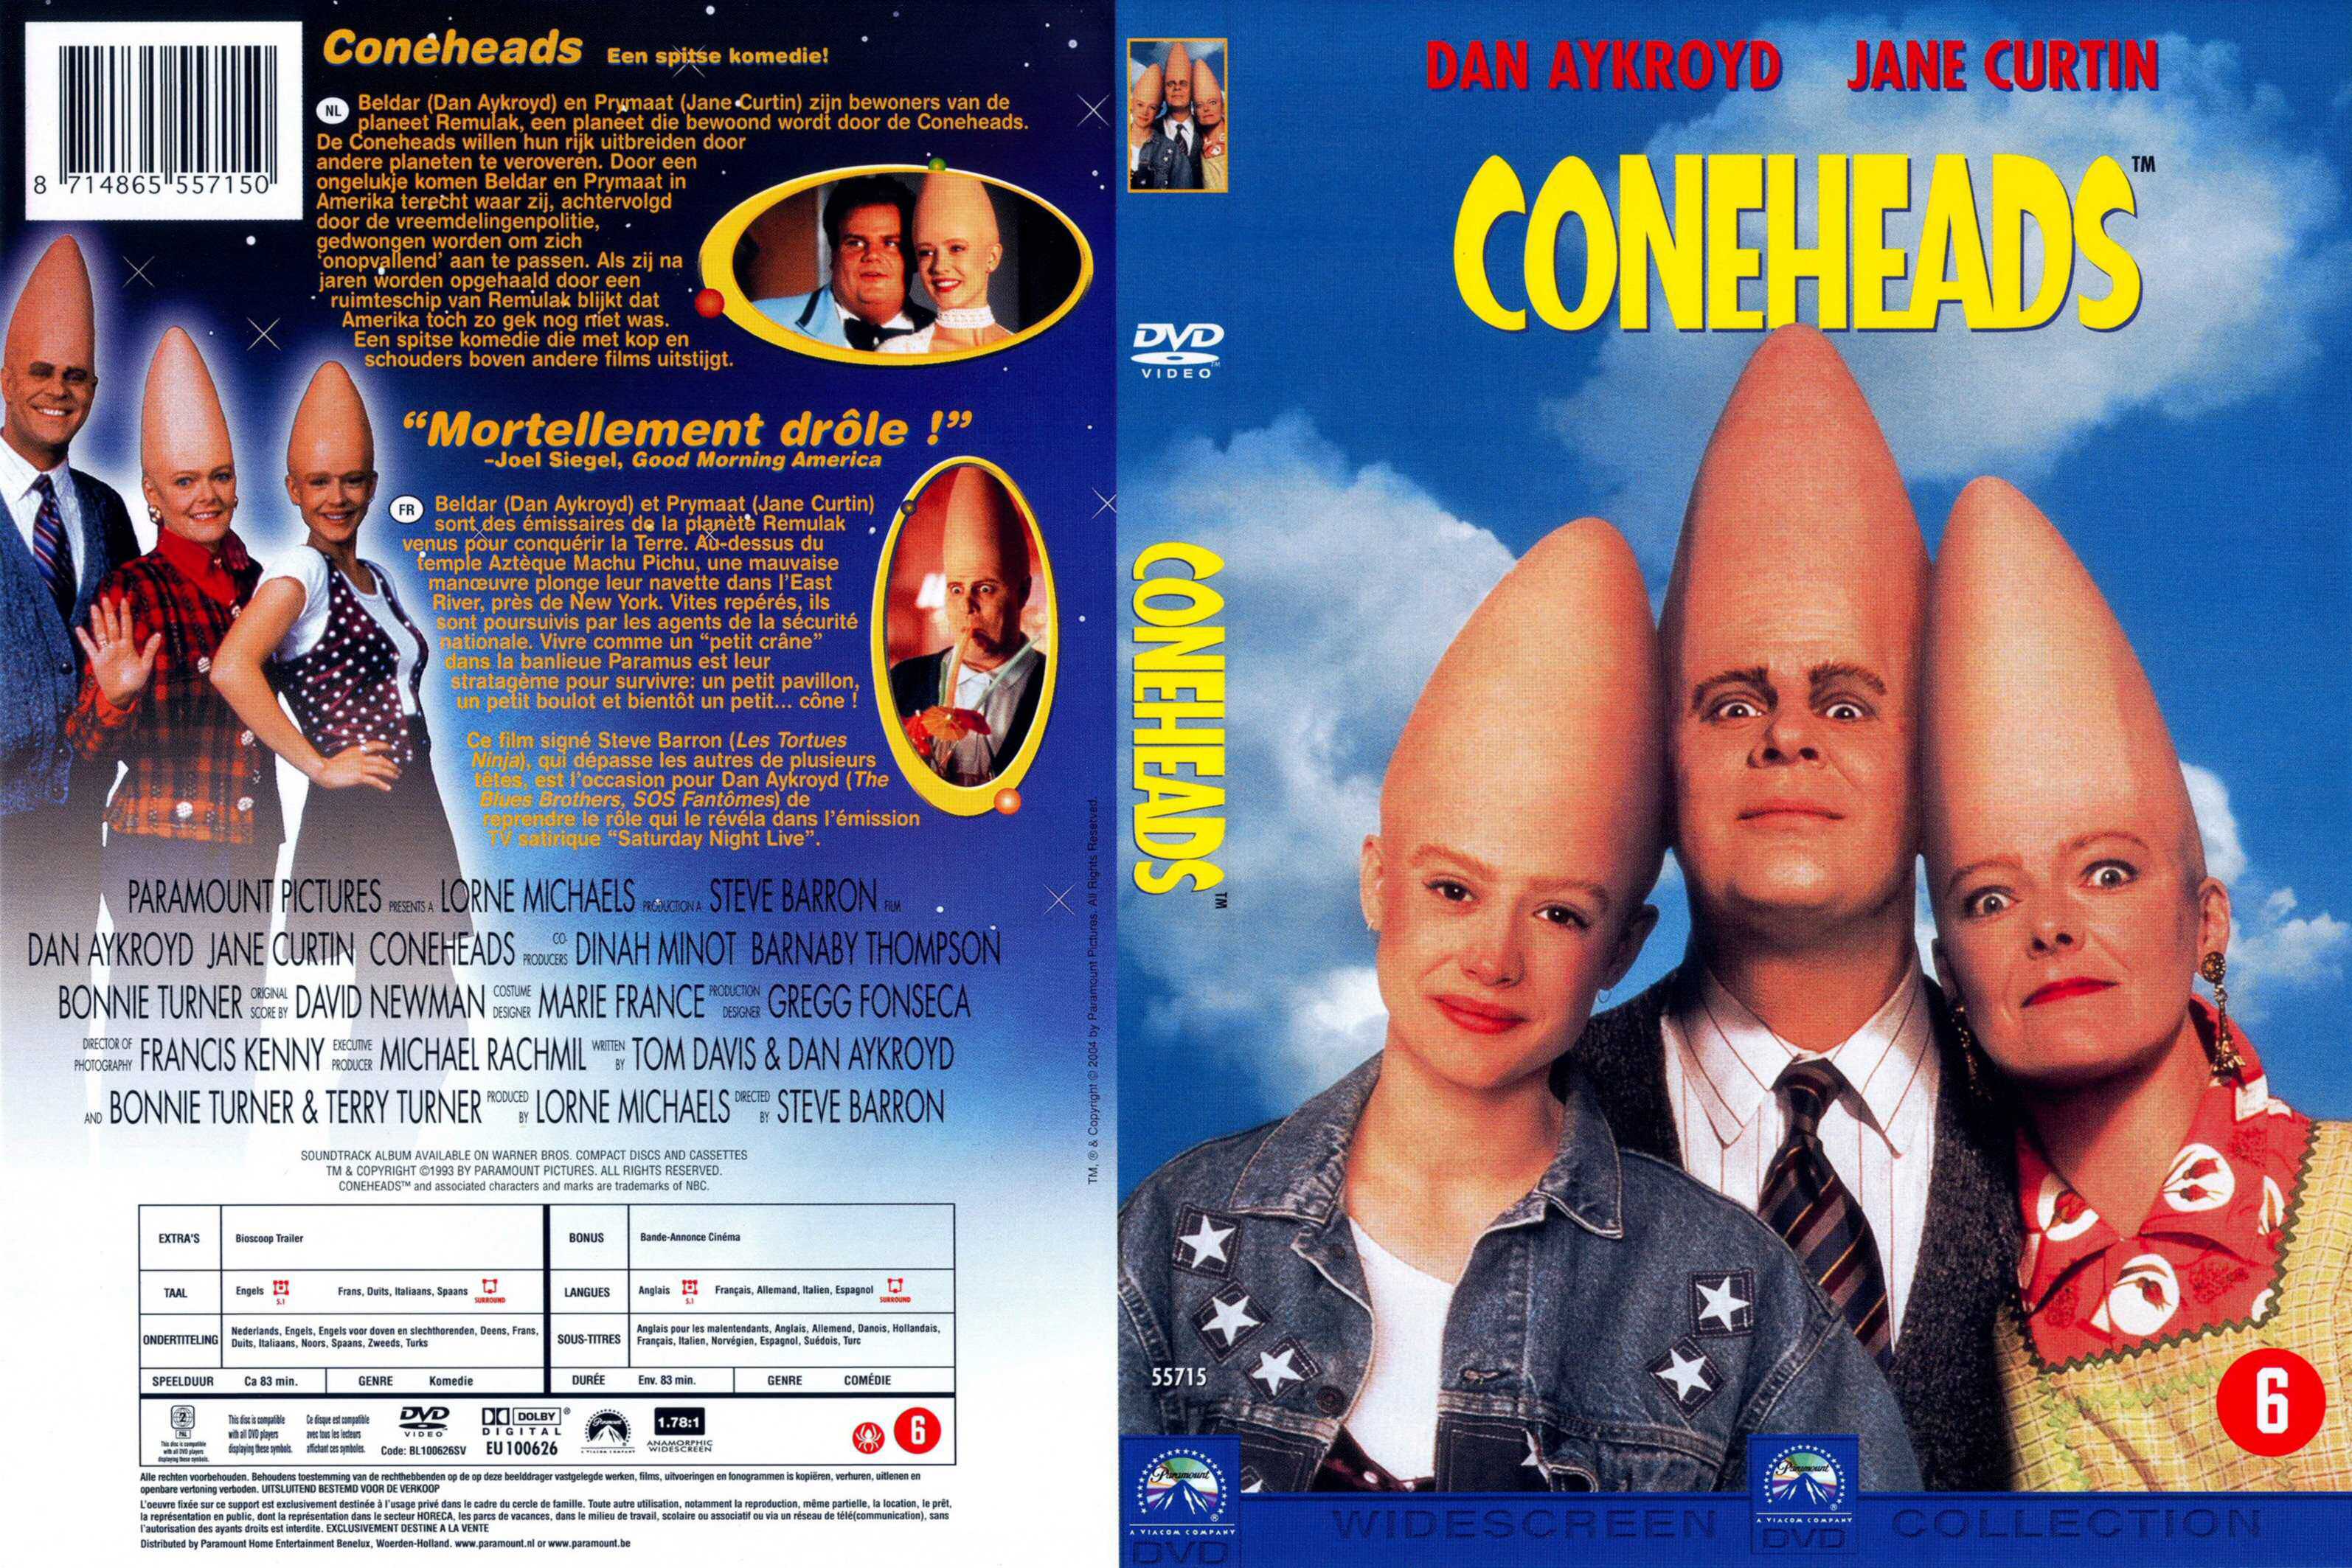 Jaquette DVD Coneheads